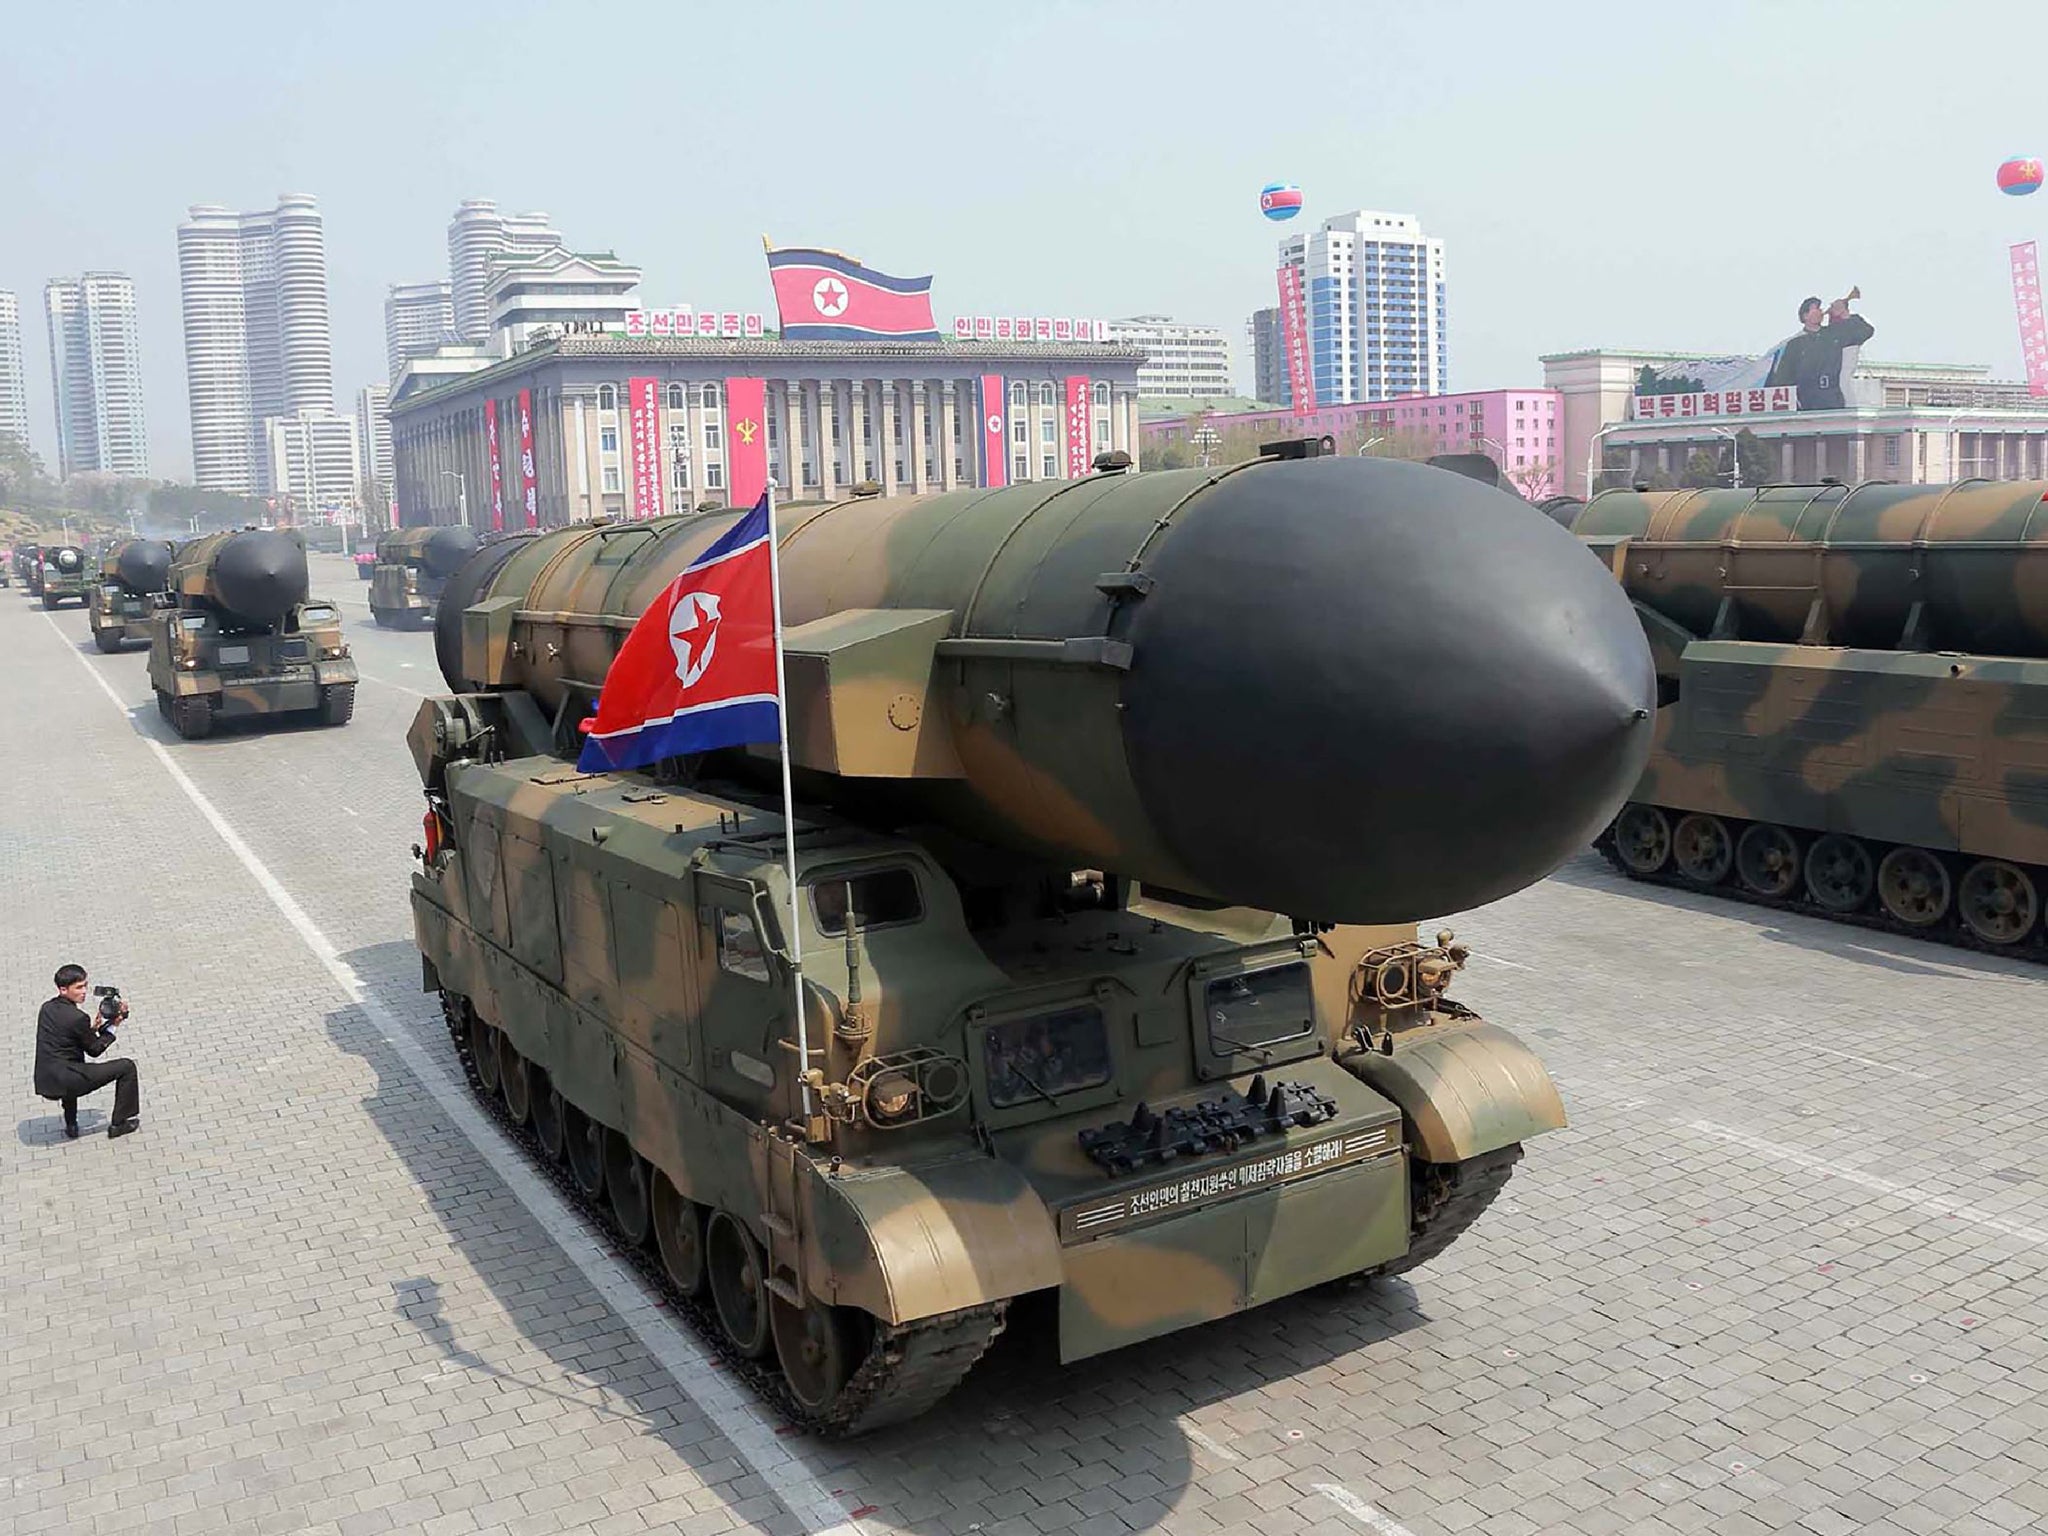 Korean People's Army ballistic missiles being displayed through Kim Il-Sung square during a military parade in Pyongyang marking the 105th anniversary of the birth of late North Korean leader Kim Il-Sung